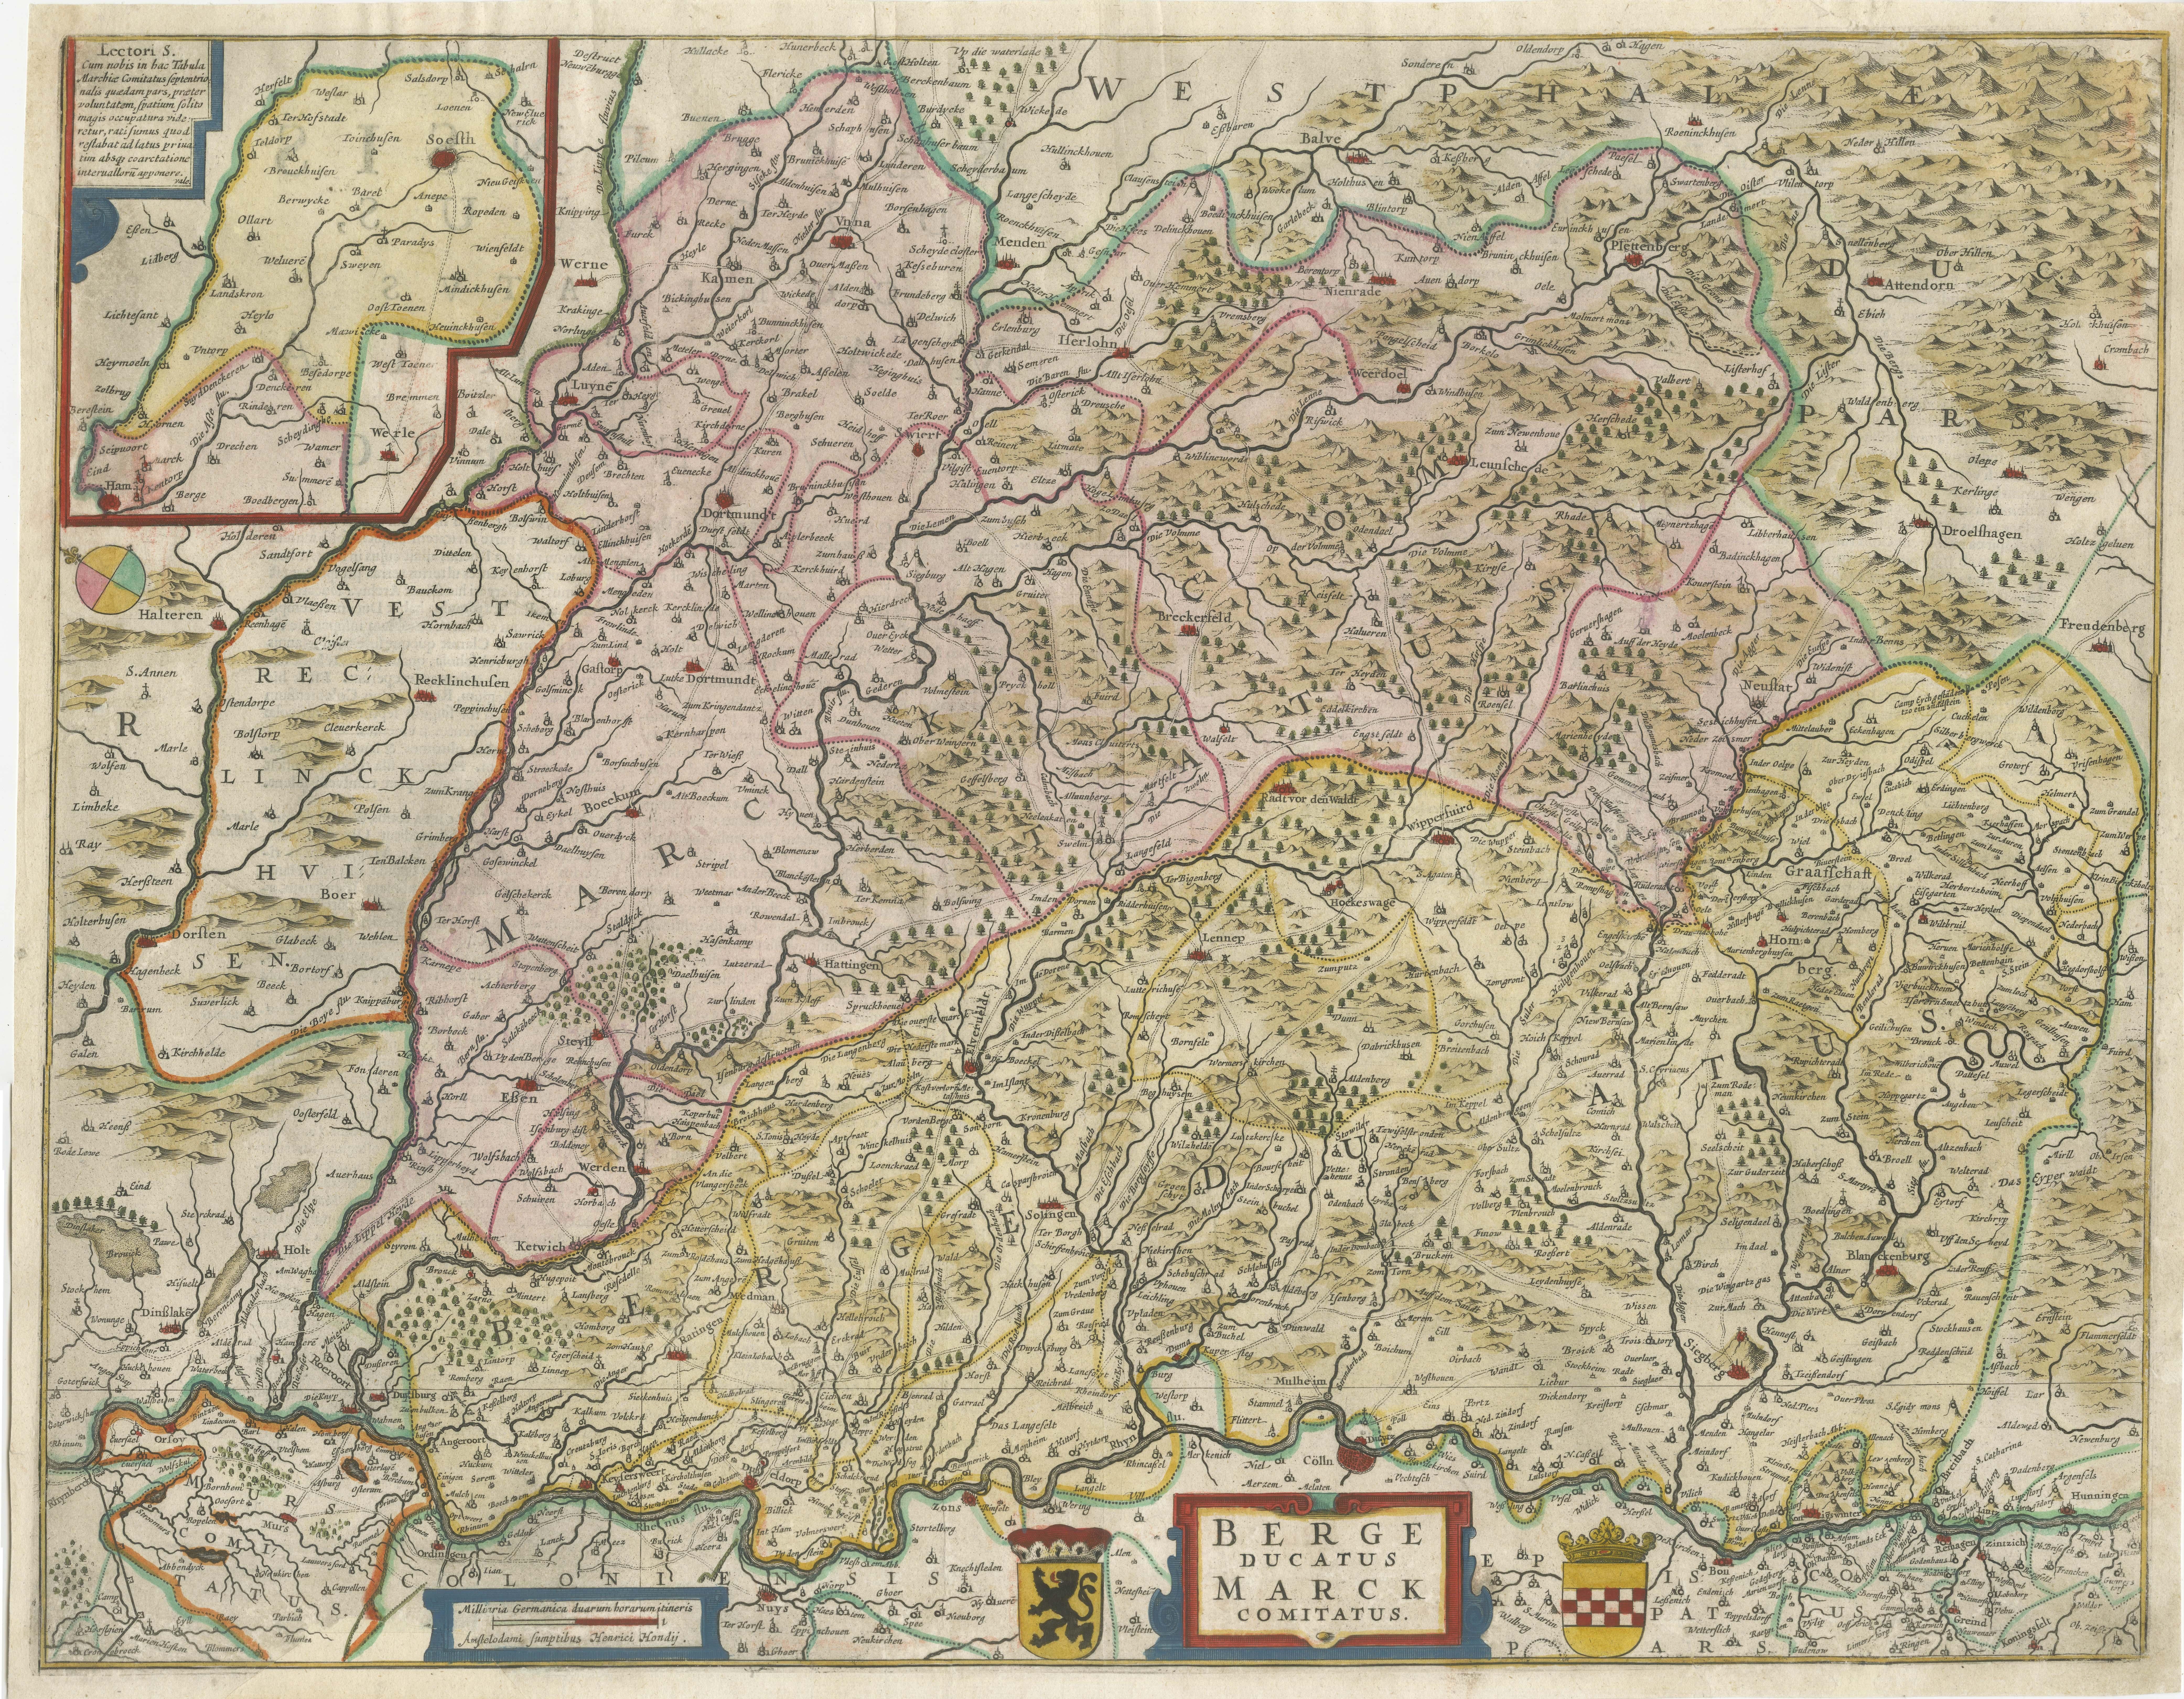 Antique map titled 'Berge Ducatus Marck Comitatus'. Original antique map of the region of Lennep, Blankenburg and Dortmund, Germany. Published by Hondius, circa 1644. 